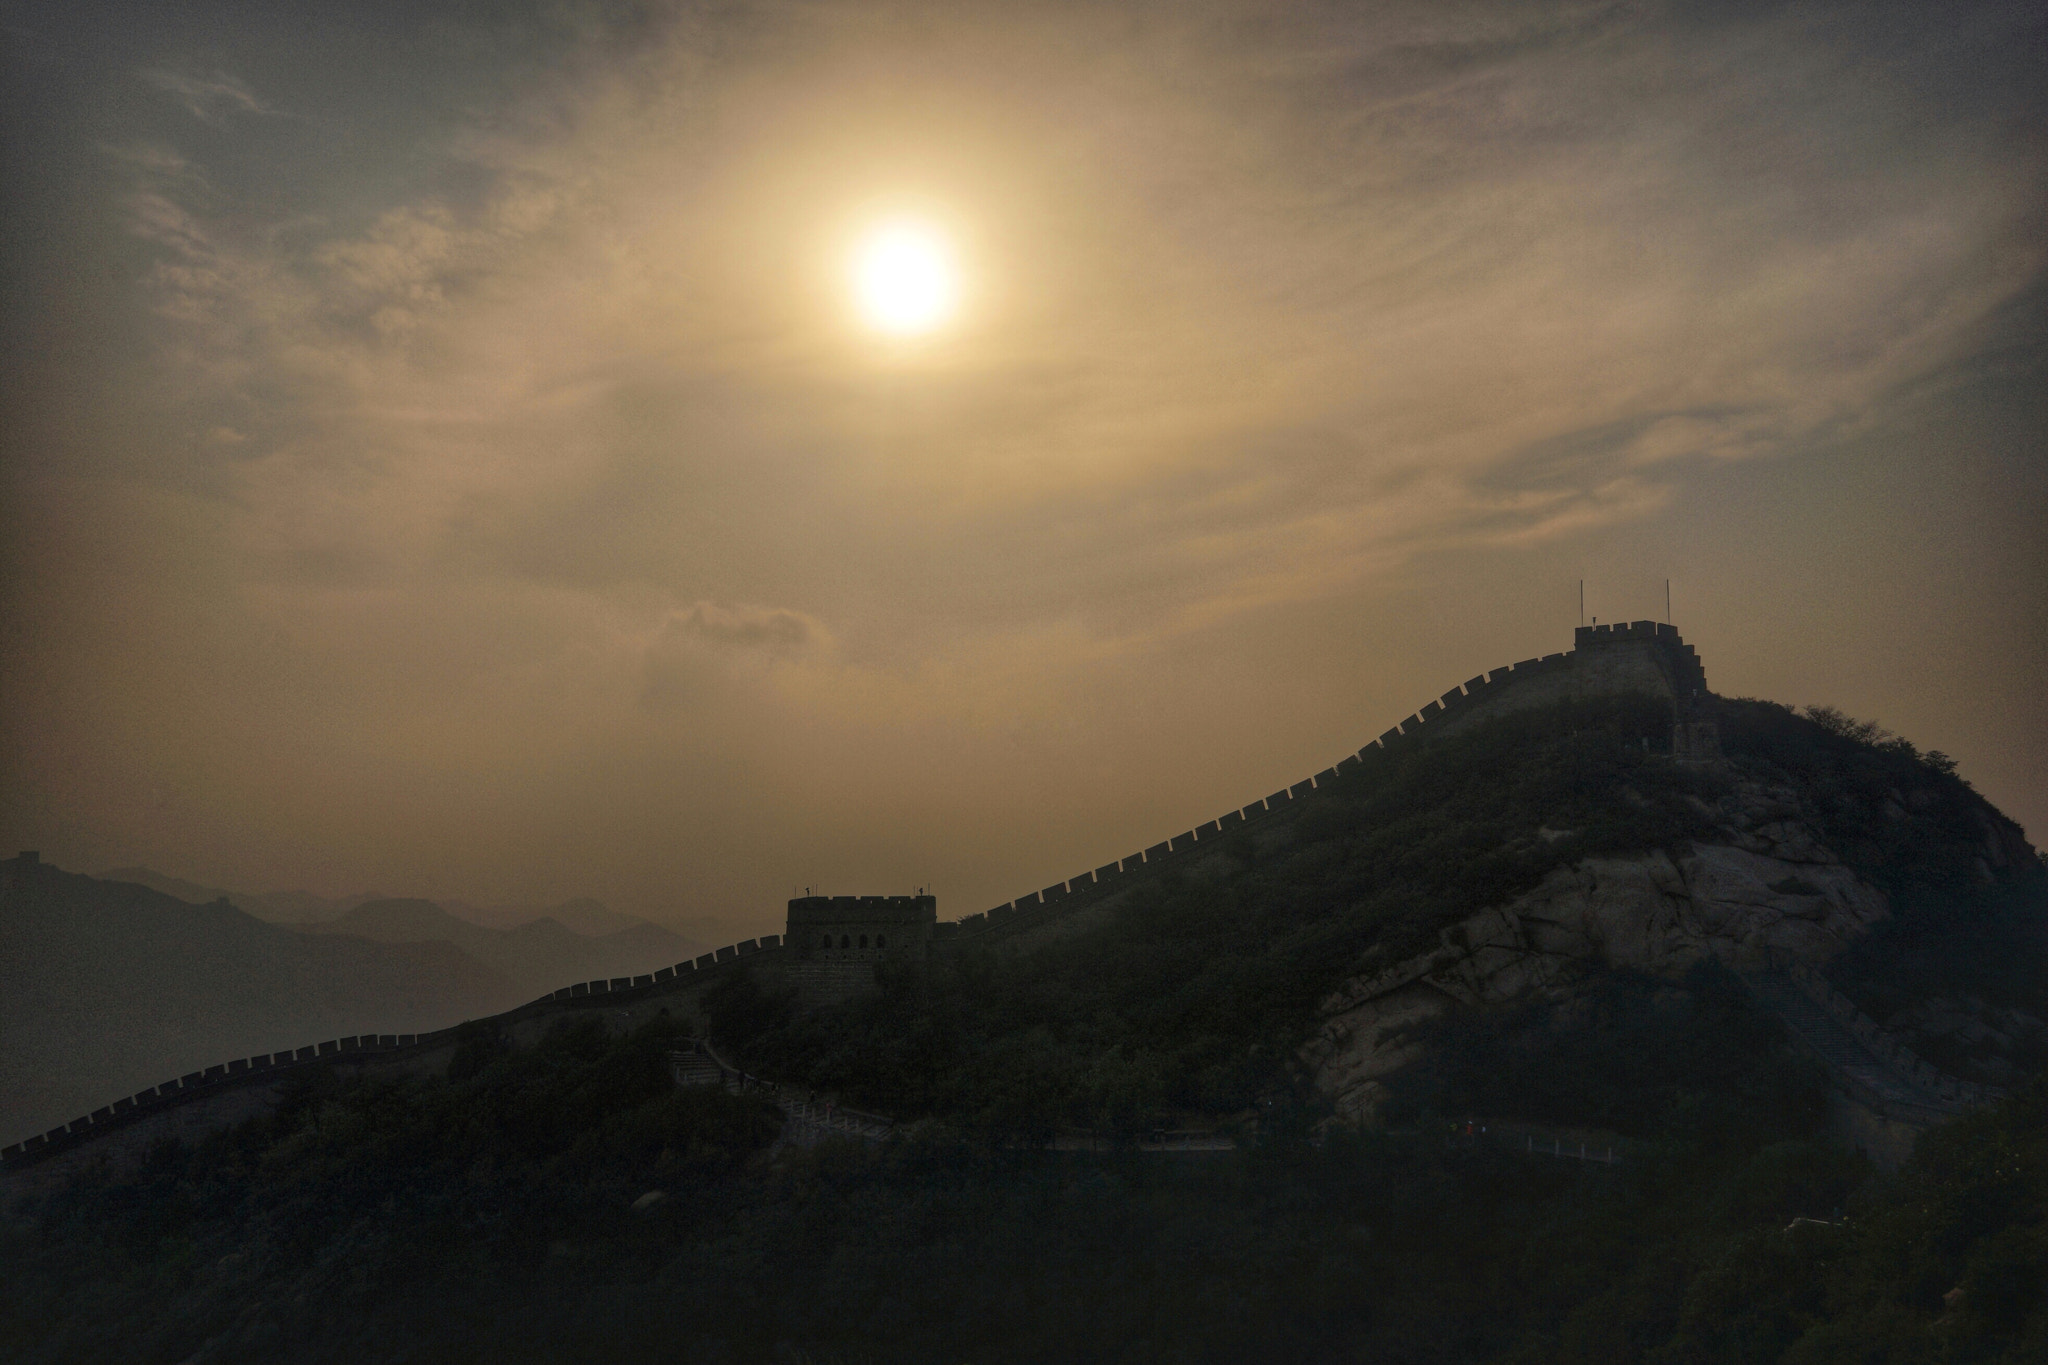 Sony a7 sample photo. Badaling great wall - a smoggy day photography